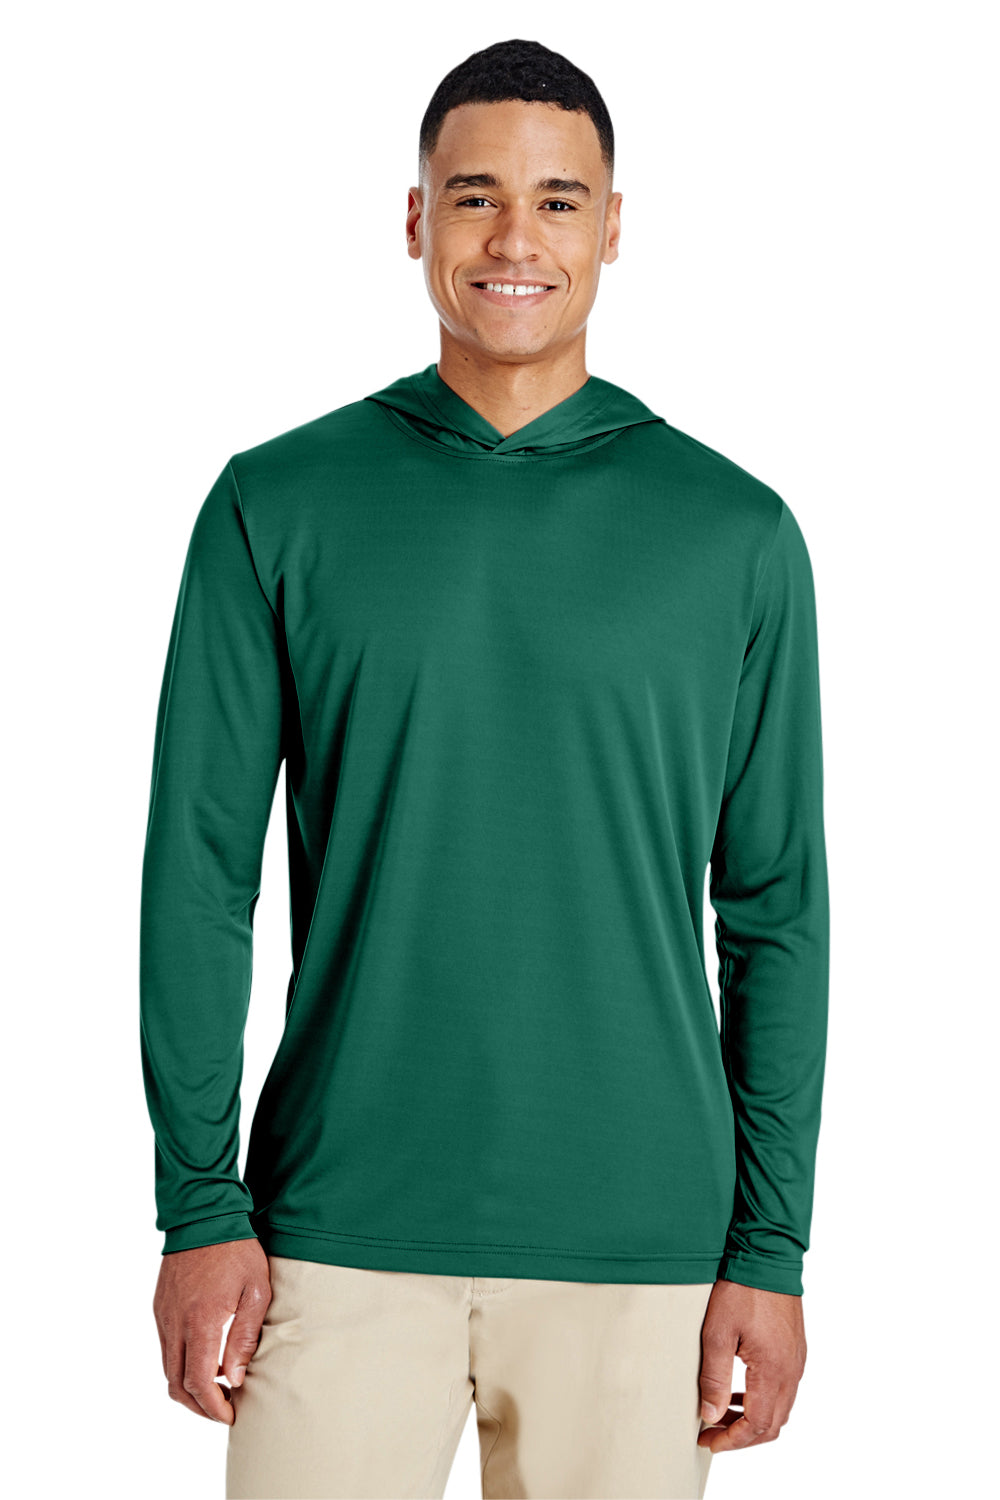 Team 365 TT41 Mens Zone Performance Moisture Wicking Long Sleeve Hooded T-Shirt Hoodie Forest Green Front